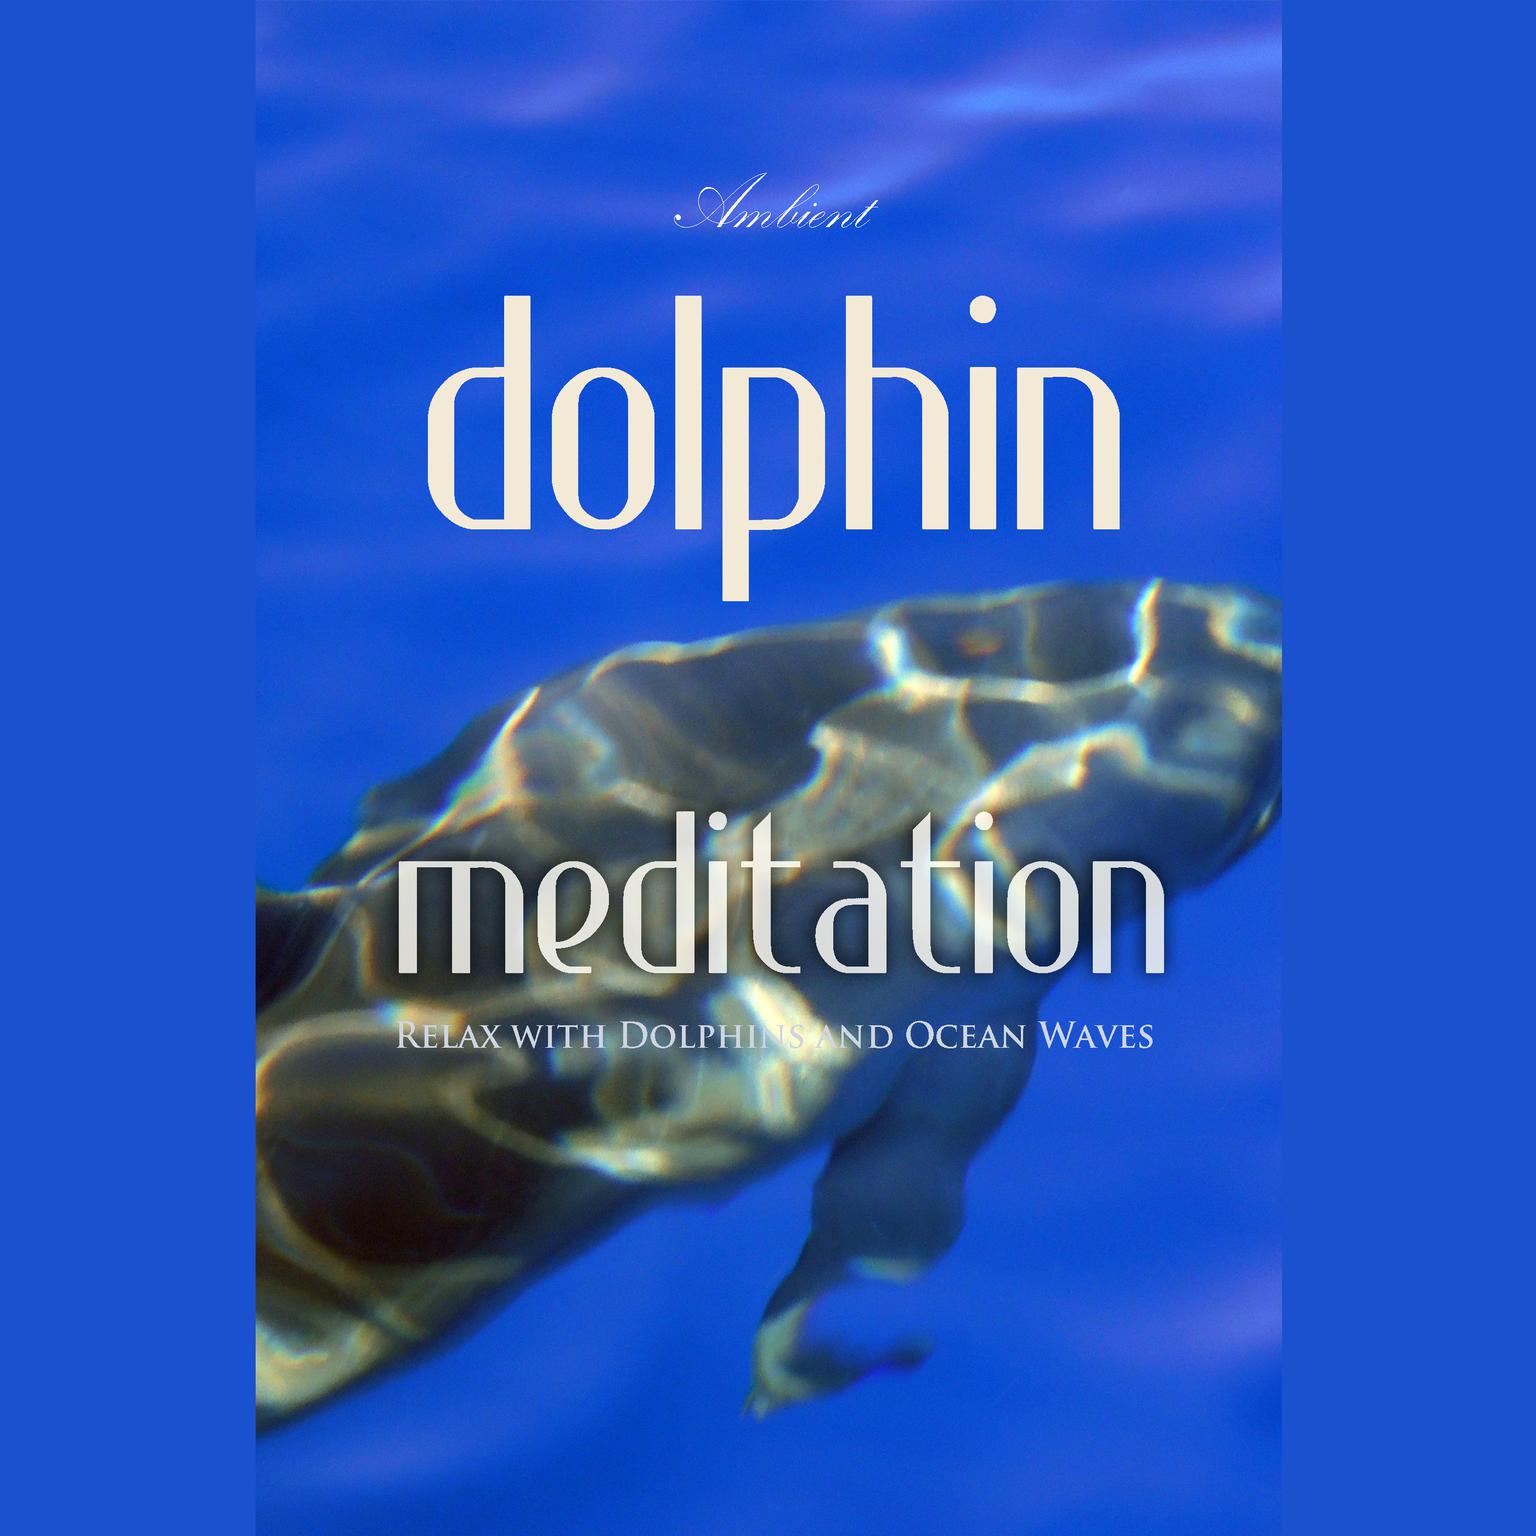 Dolphin Meditation: Relax with Dolphins and Ocean Waves Audiobook, by Greg Cetus